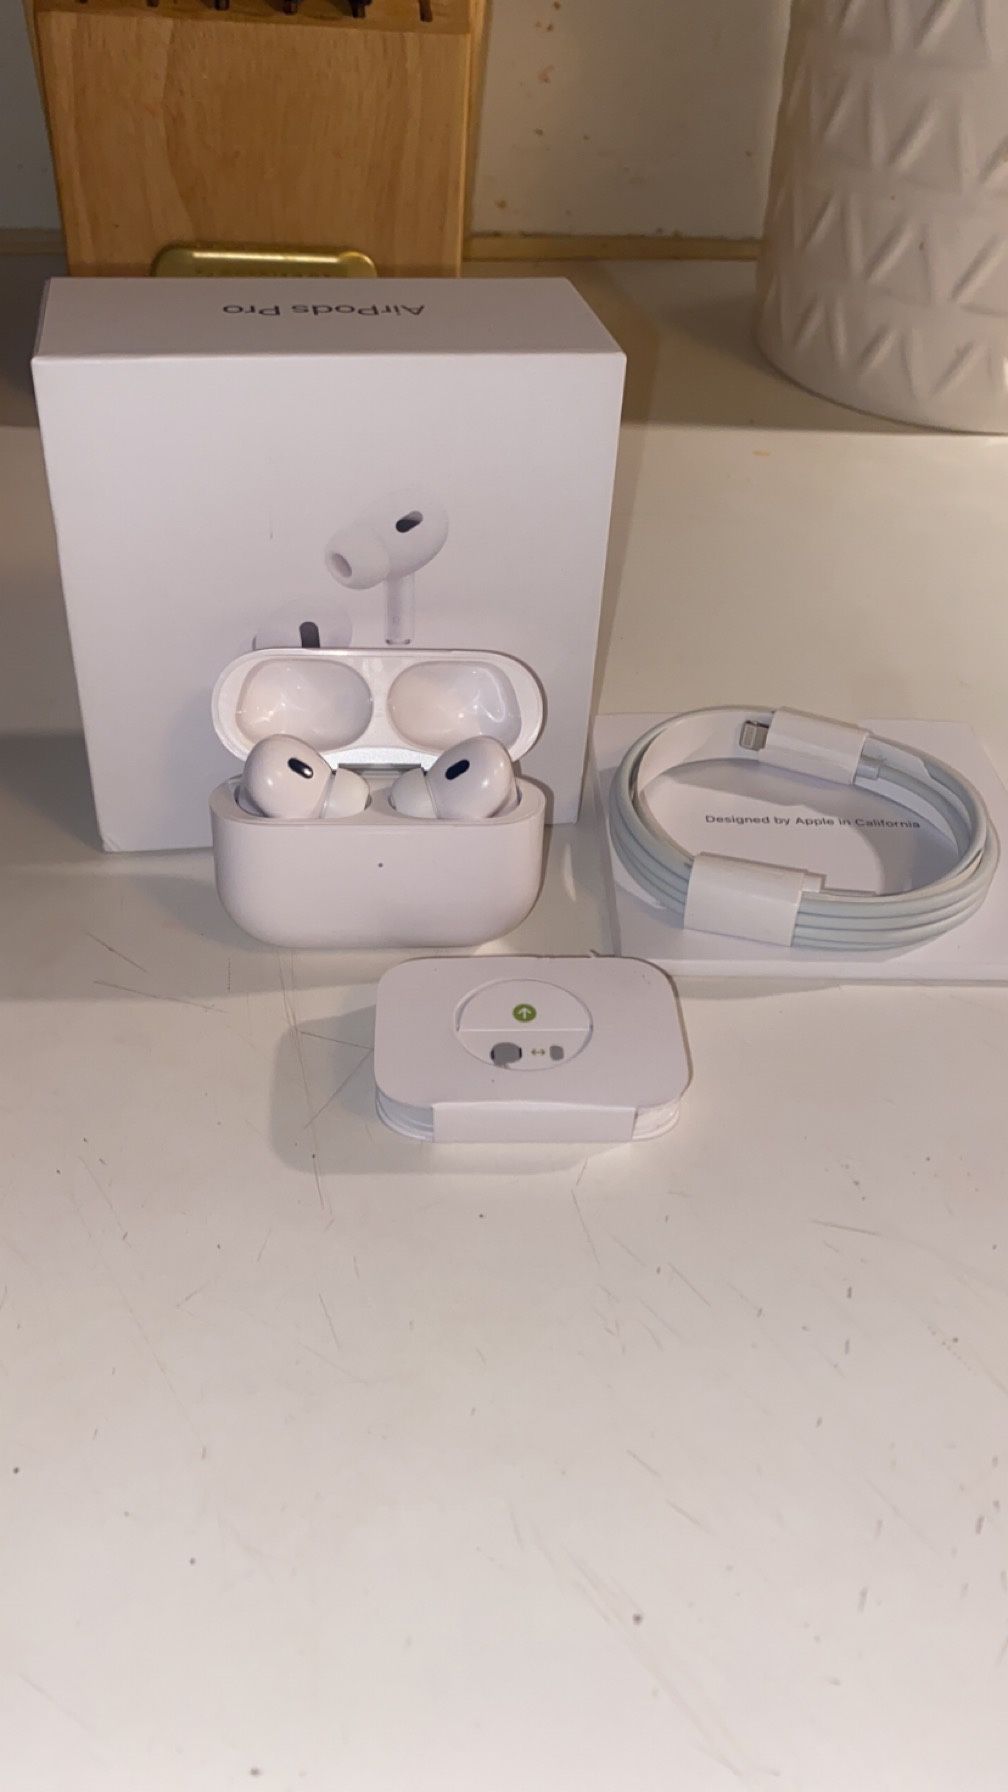 2nd generation airpod pros 